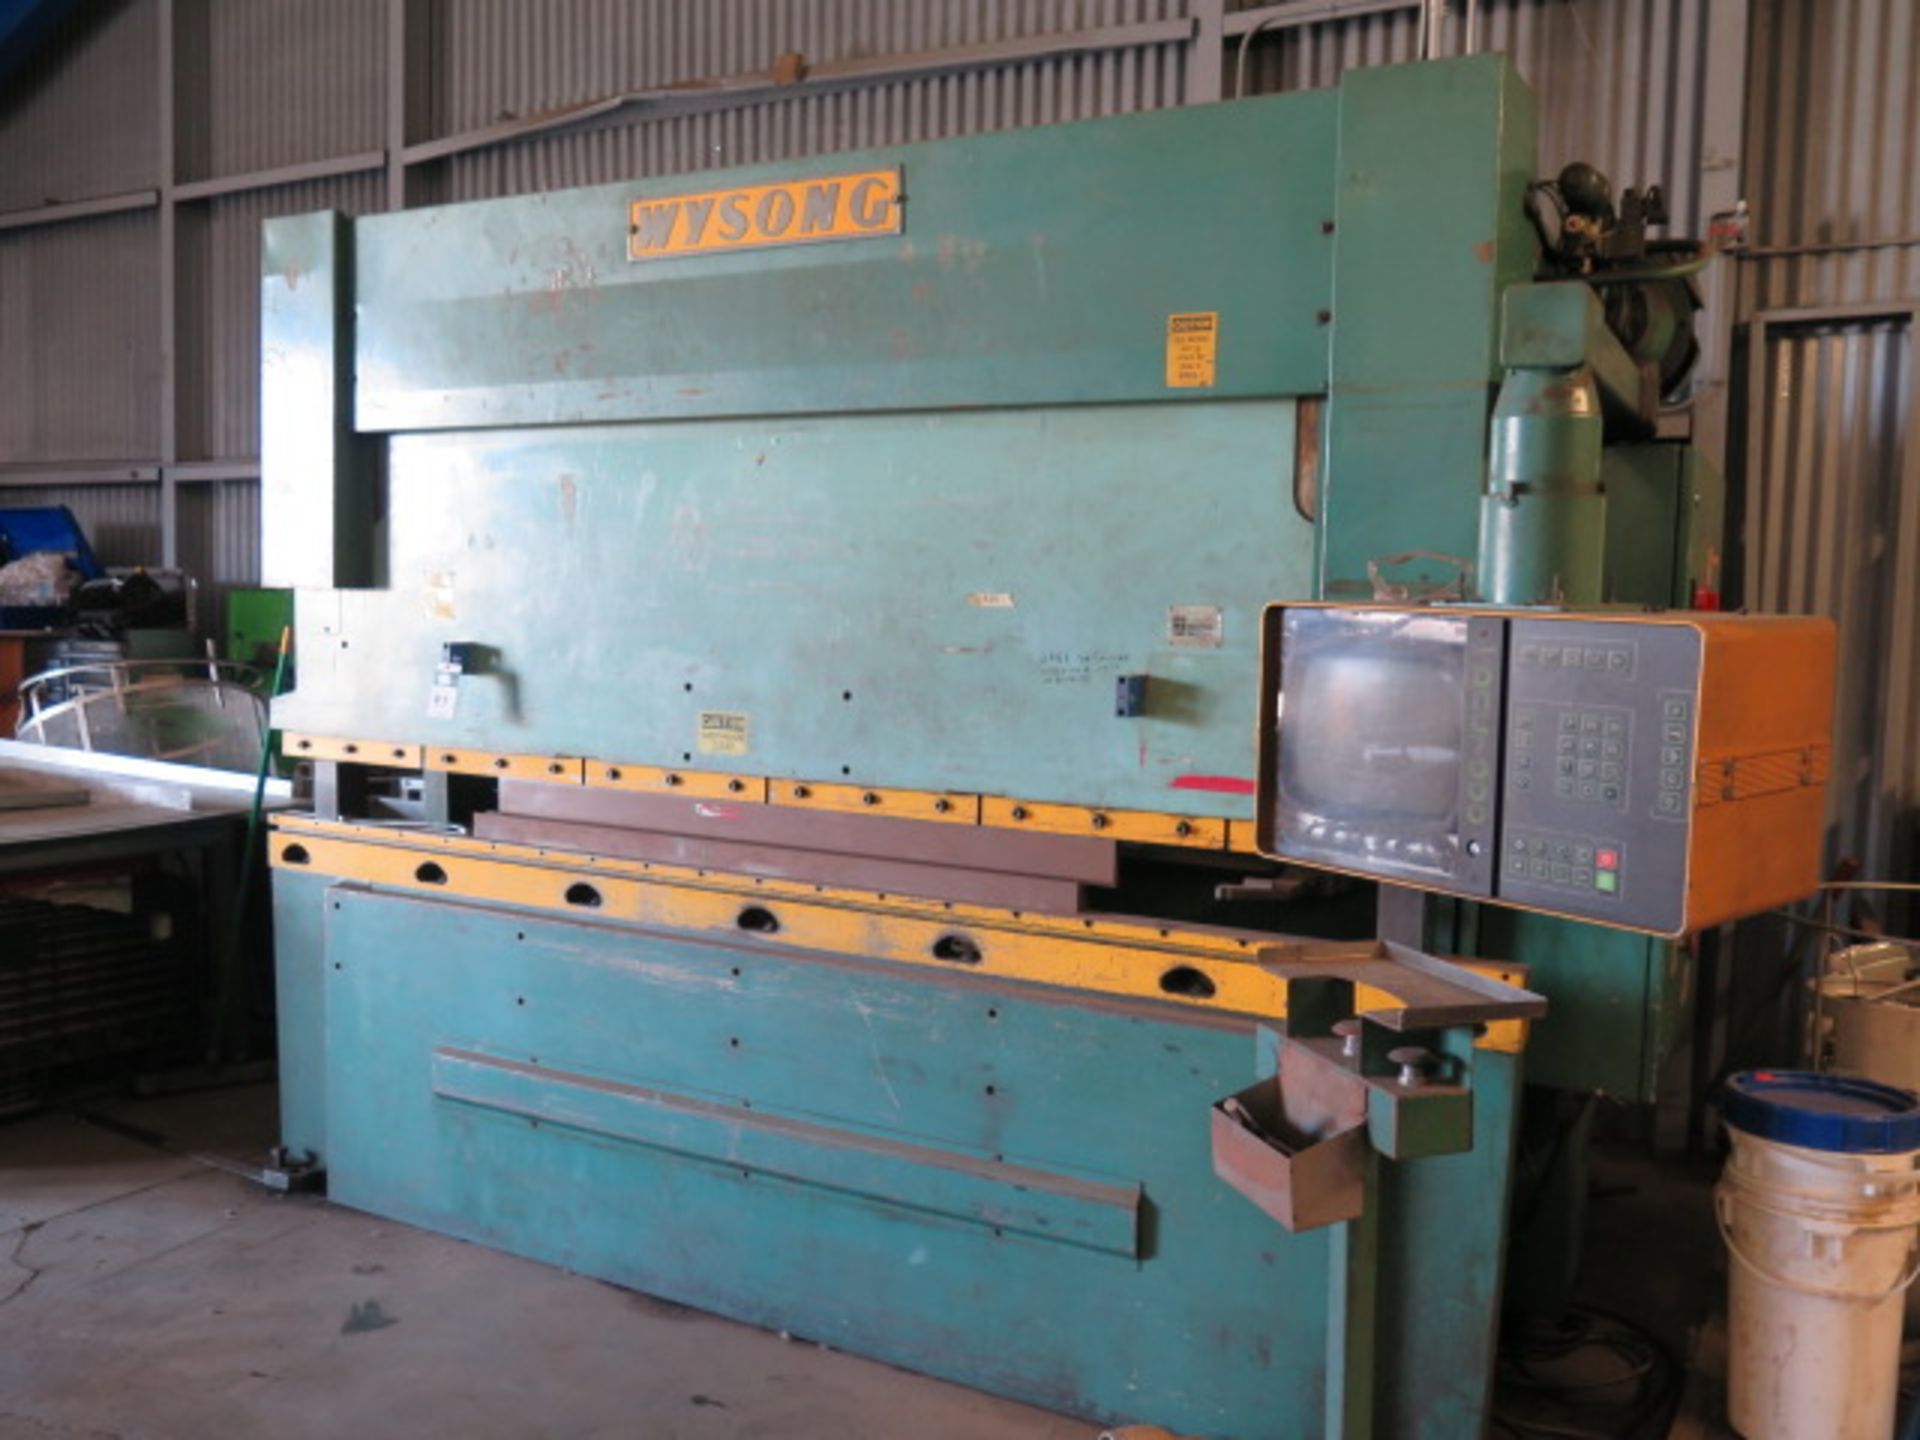 Wysong RT4-140 140 Ton x 10’ CNC Press Brake s/n R11-111-A w/ Graphic DNC7000 Controls, SOLD AS IS - Image 2 of 10